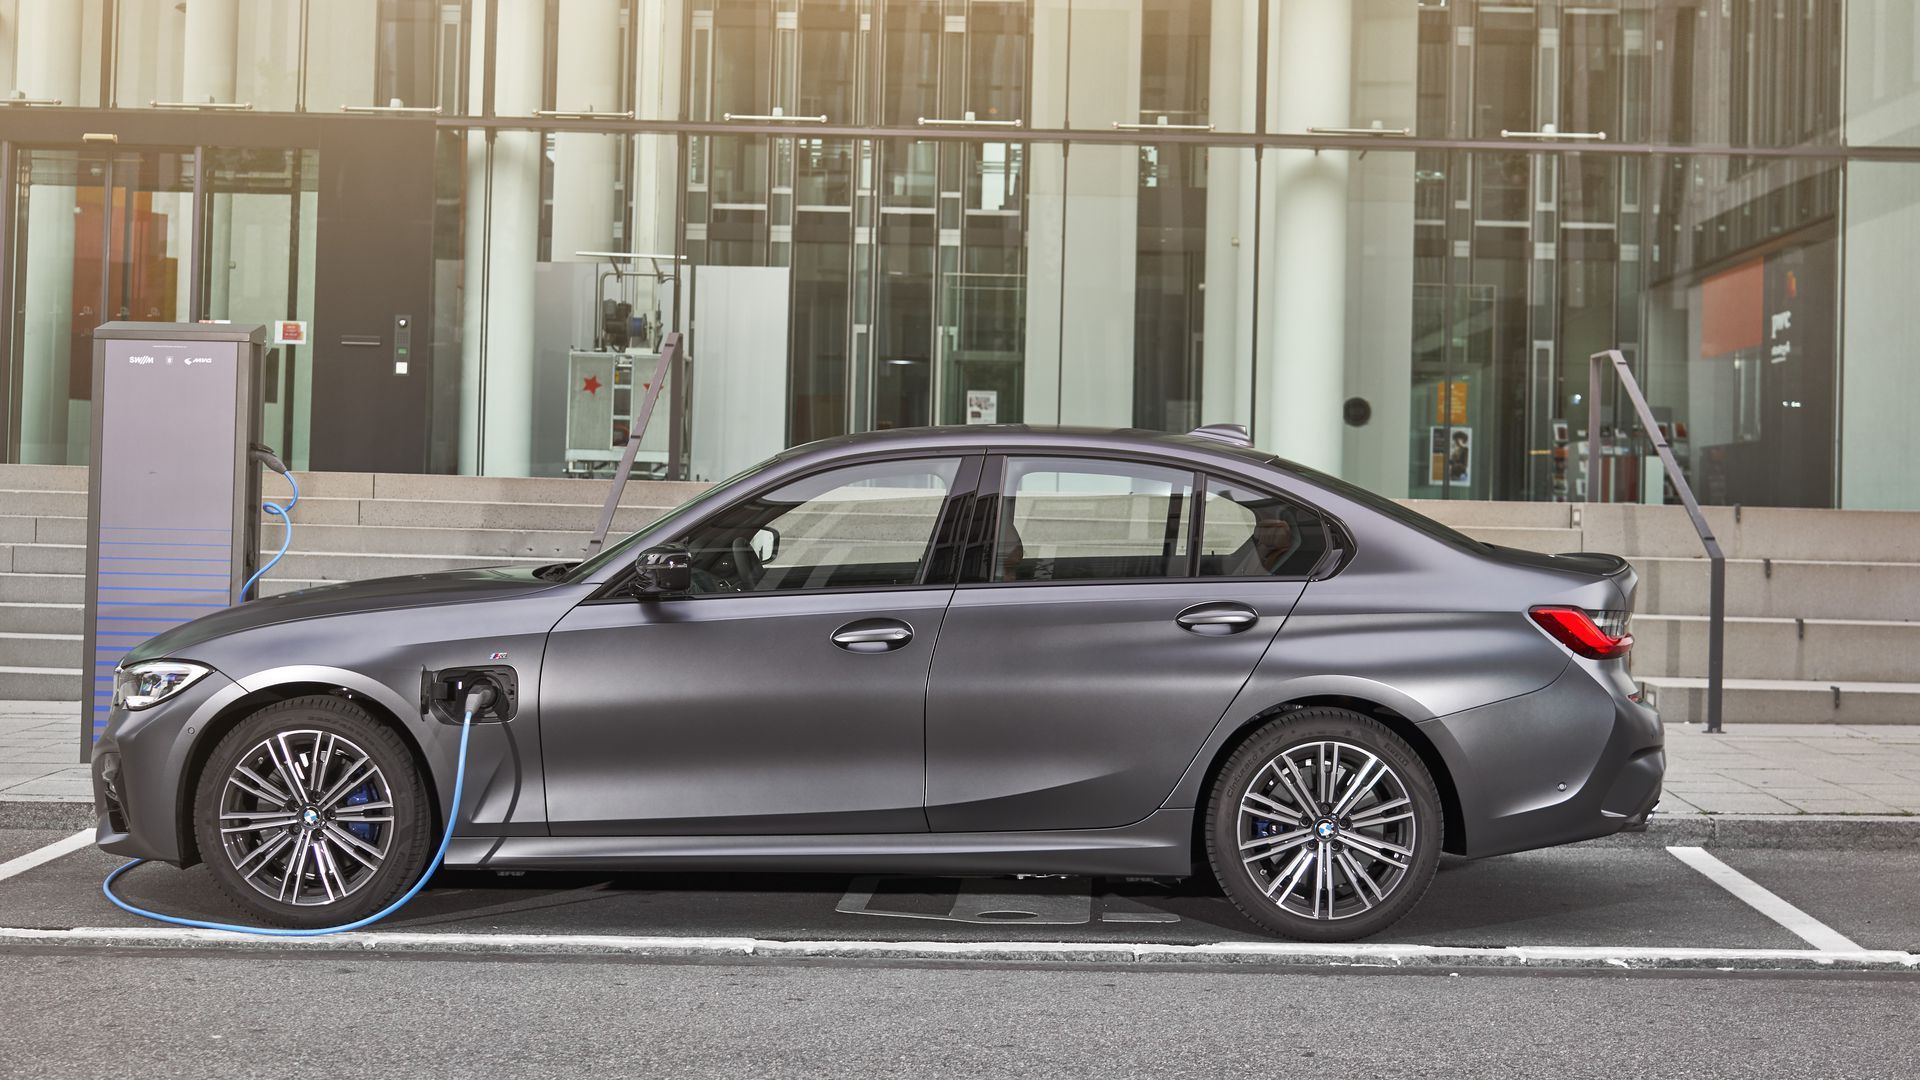 Picture of a BMW Sedan electric vehicle